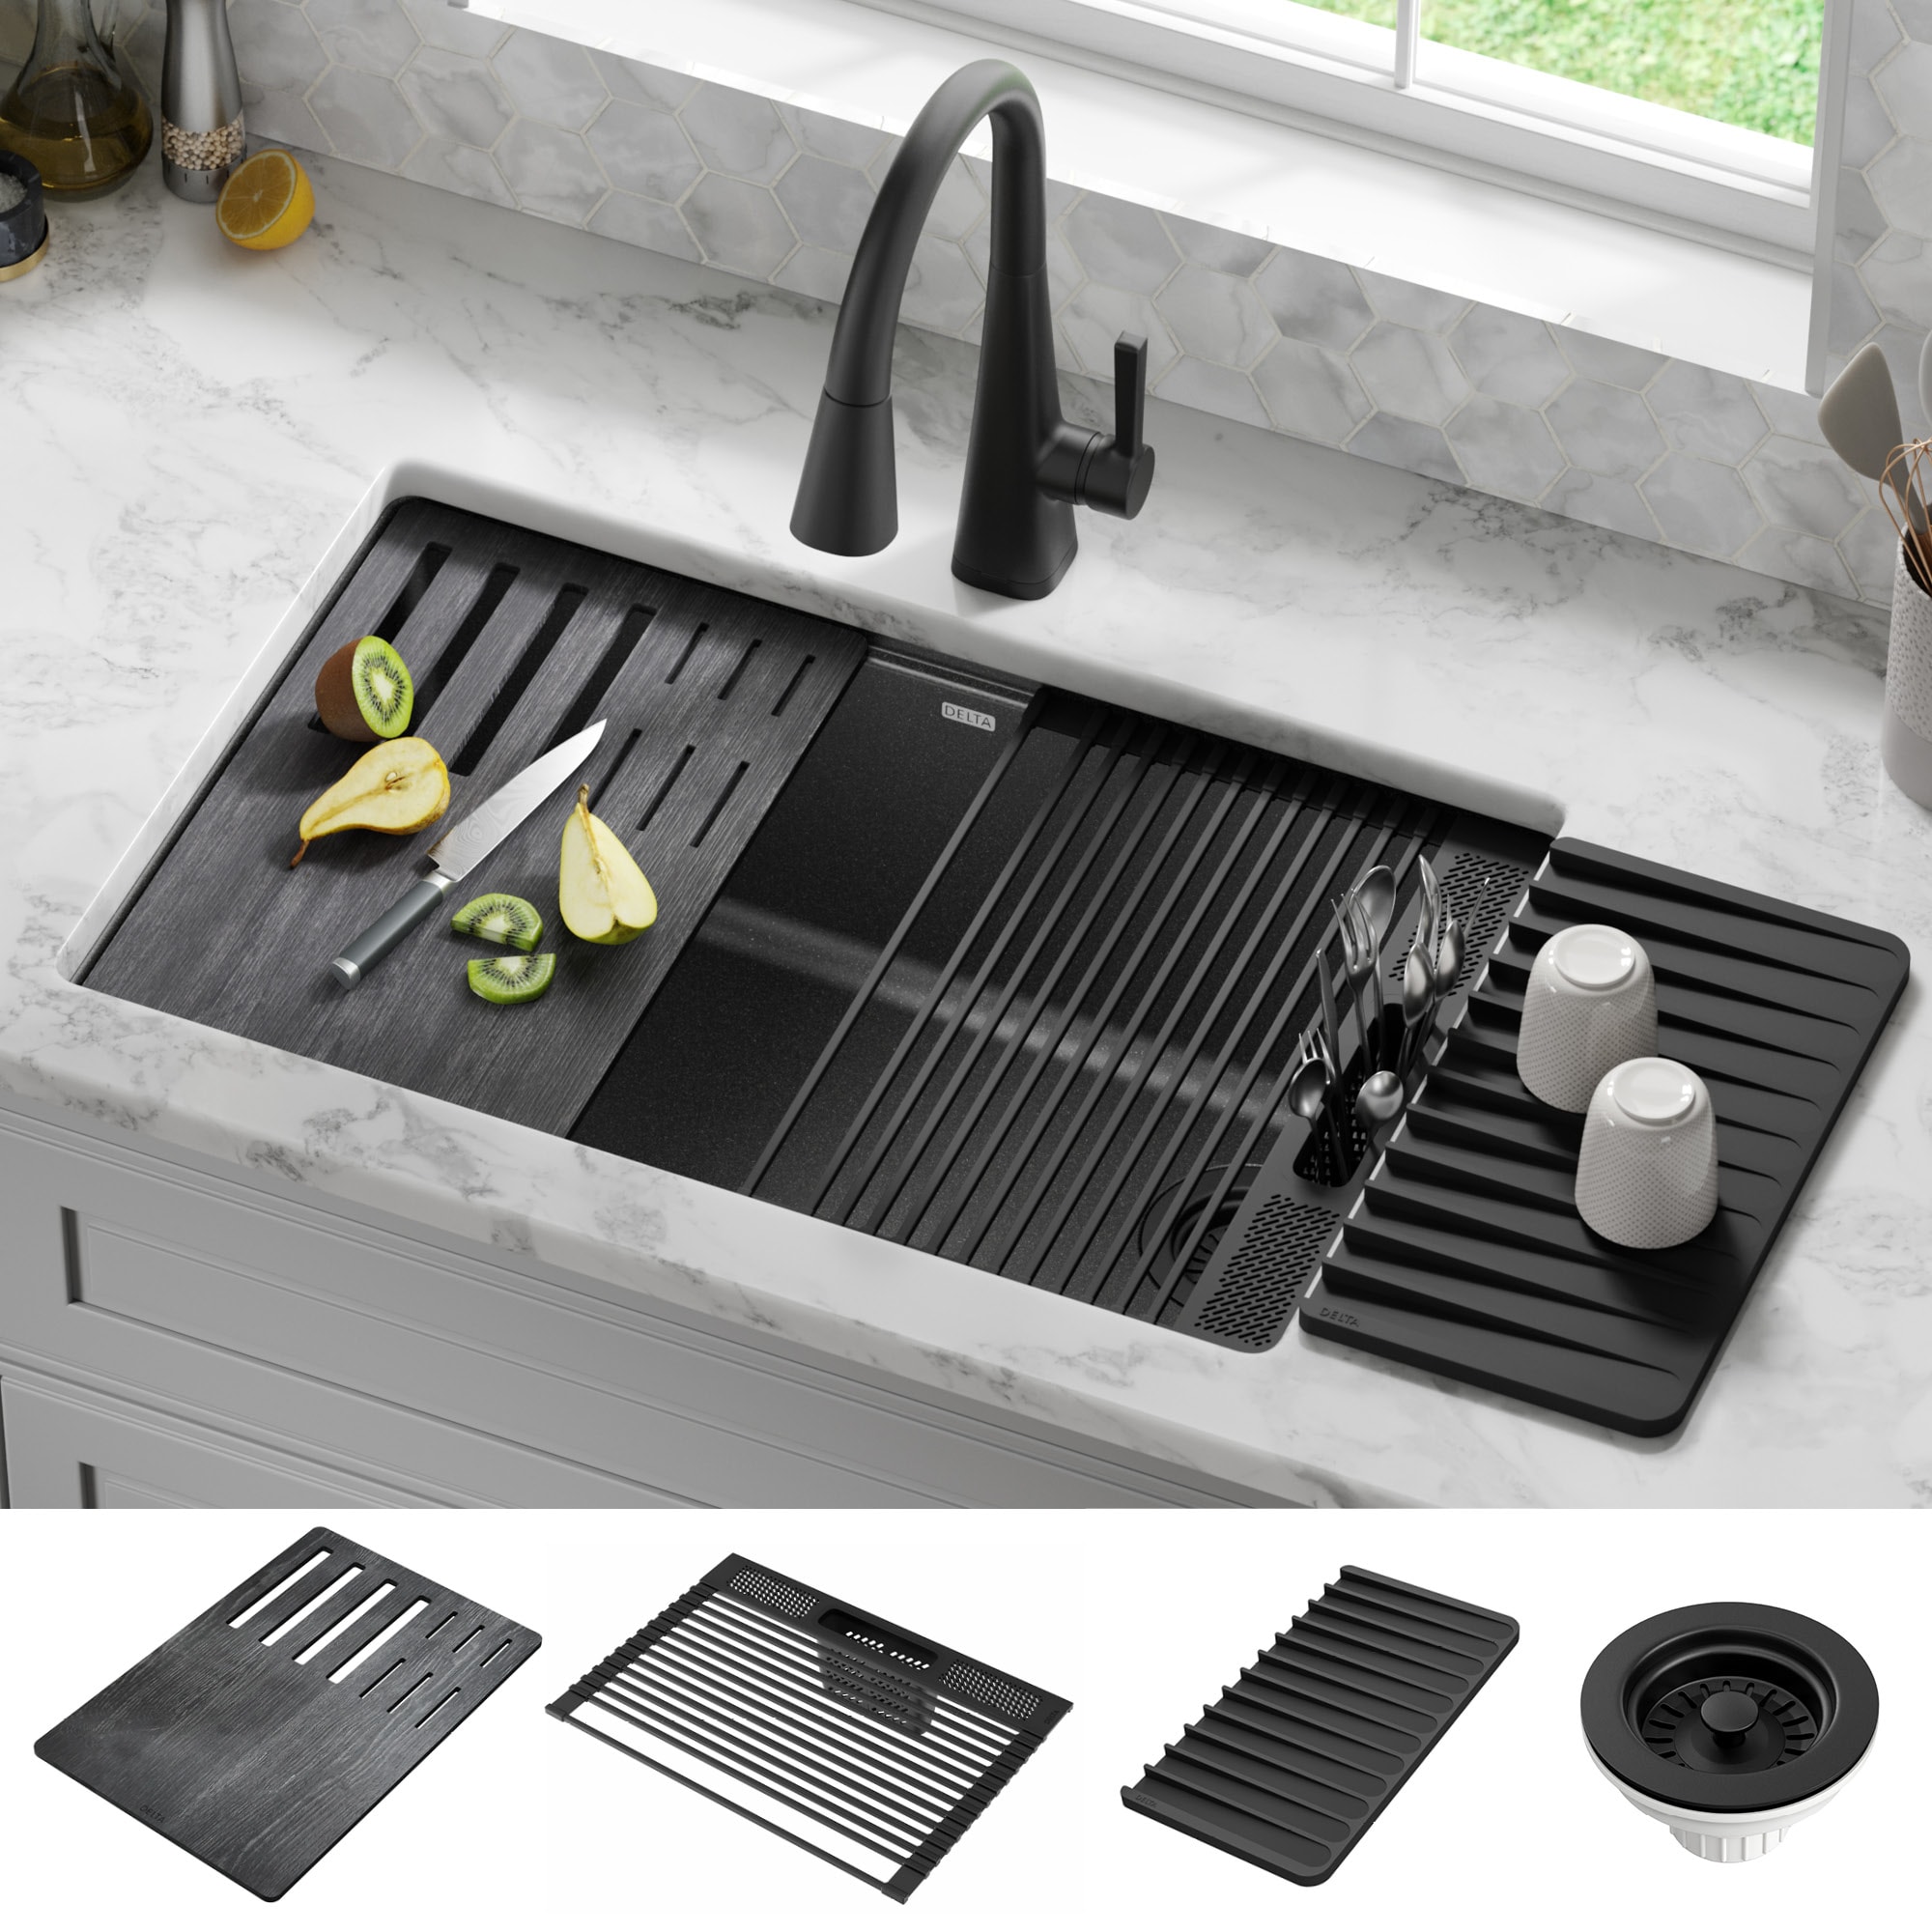 TOOLF Dish Drying Rack, High-Sided Dish Rack for Kitchen Counter, Dish  Drainer with Utensil Holder and Drainboard, Small Sink Drainer for Sink,  Black